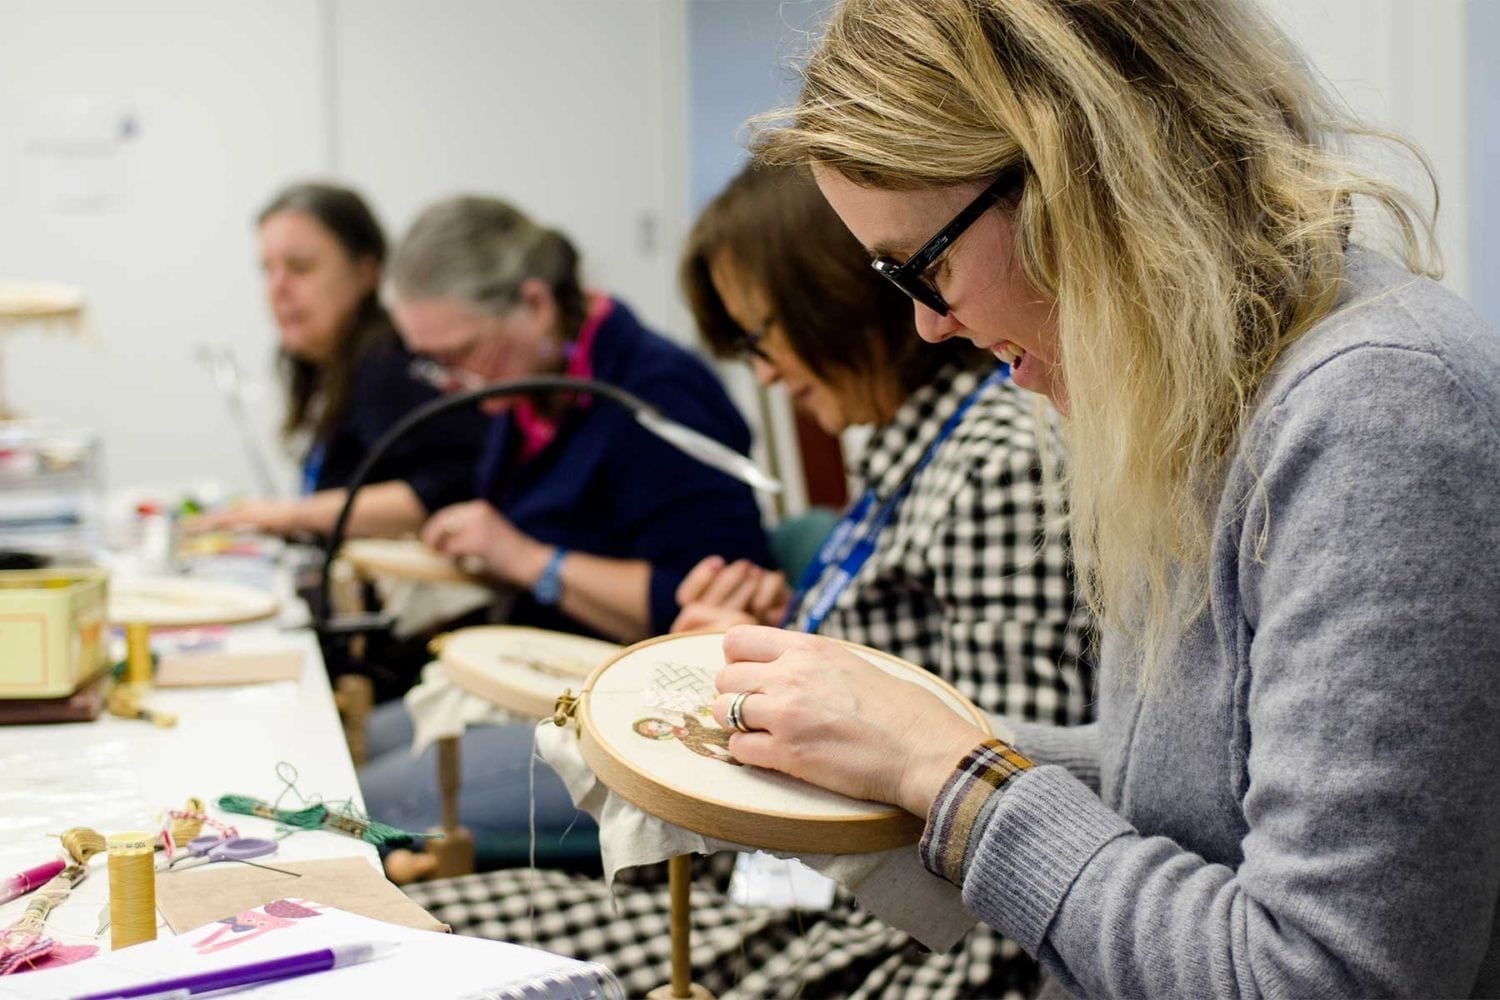 A group of women stitching using hoops.